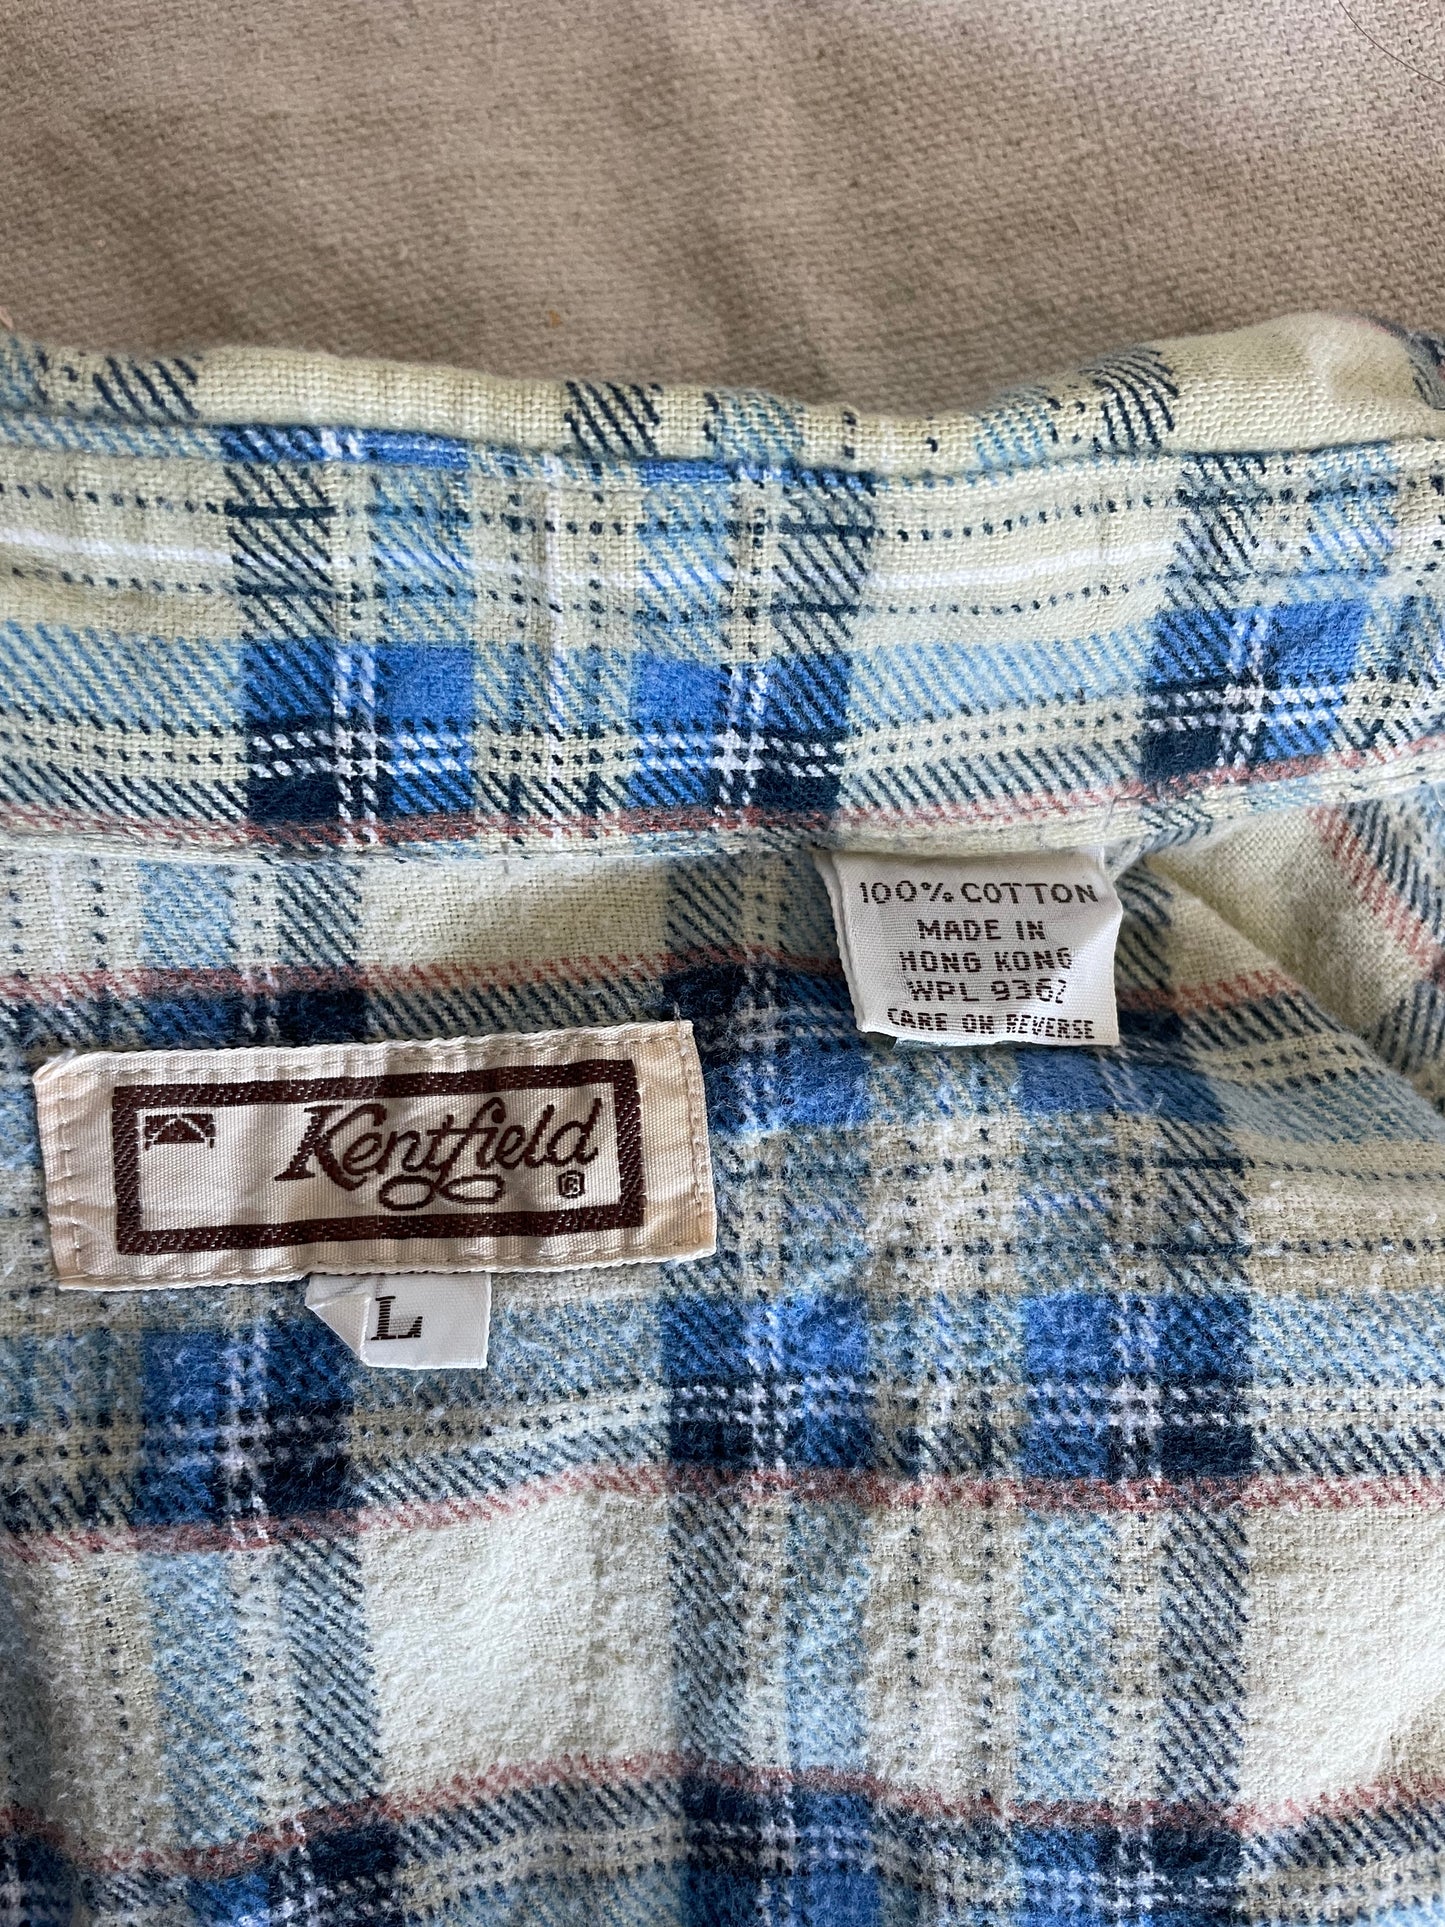 80s/90s Flannel Shirt